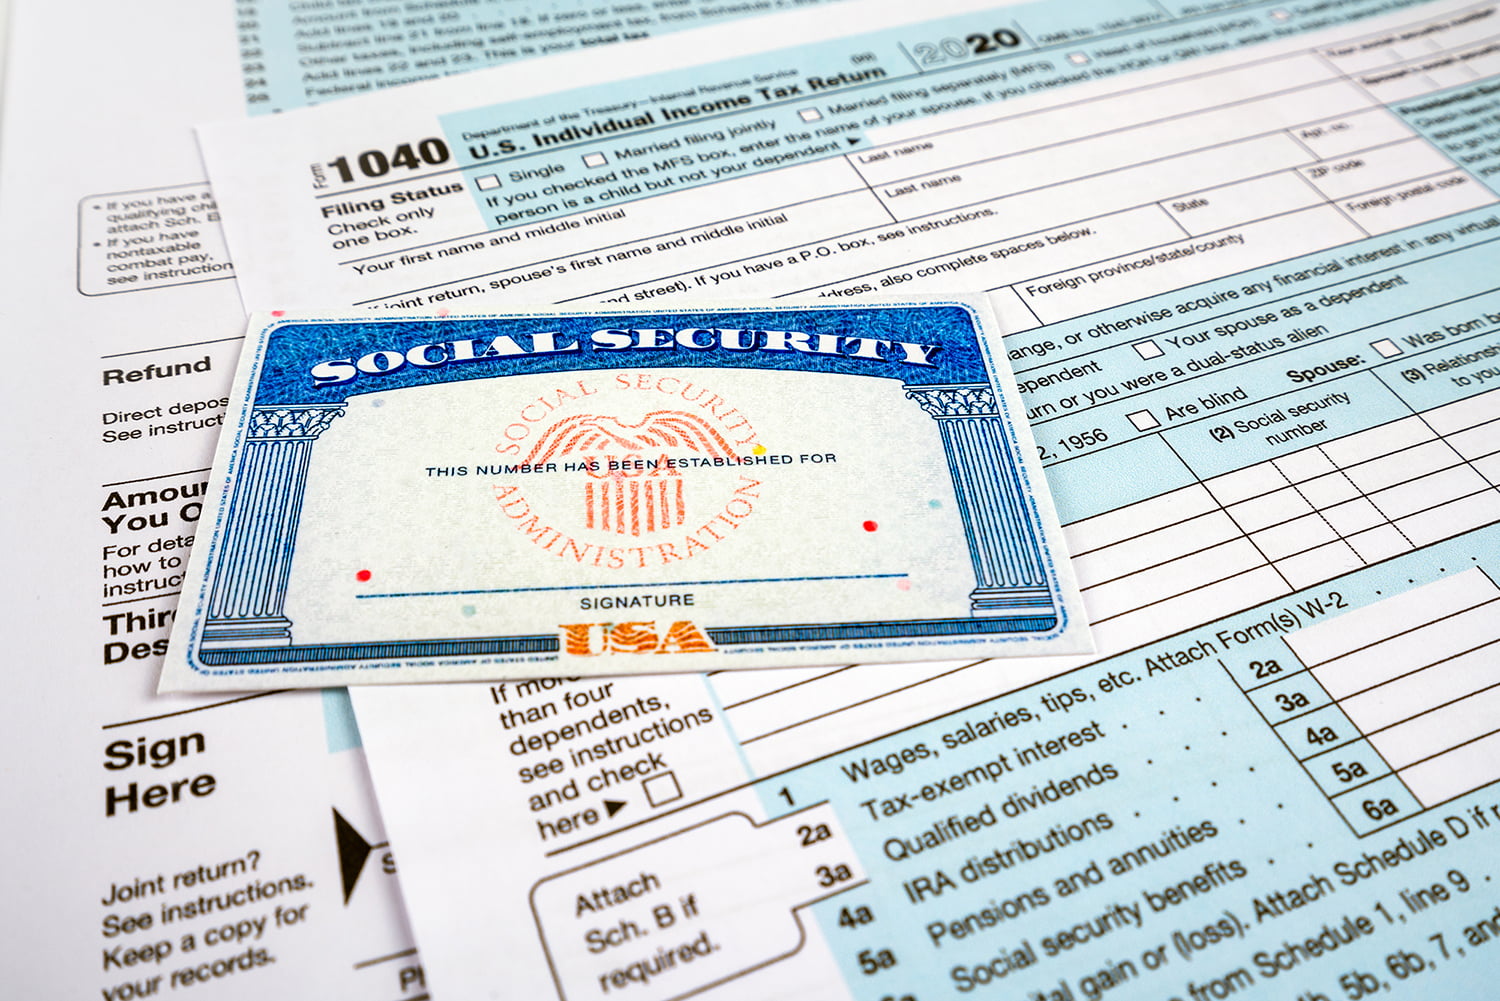 Blank social security card, and 1040 us individual tax income return form